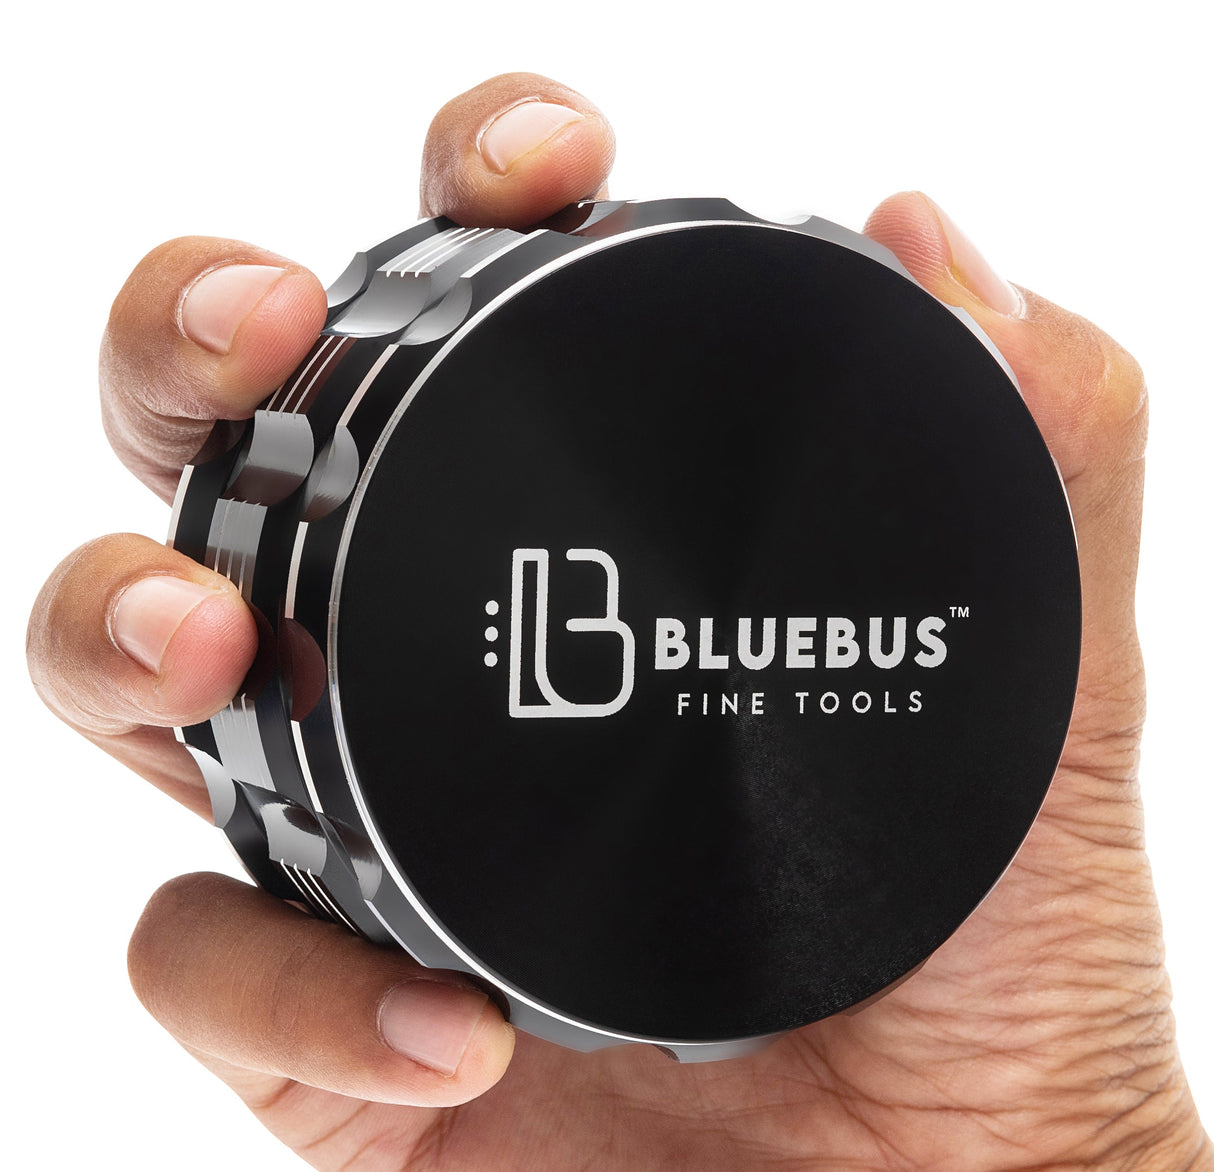 Hand holding Black GA Aluminum Grinder by Blue Bus Fine Tools, 3.5" size, front view on white background